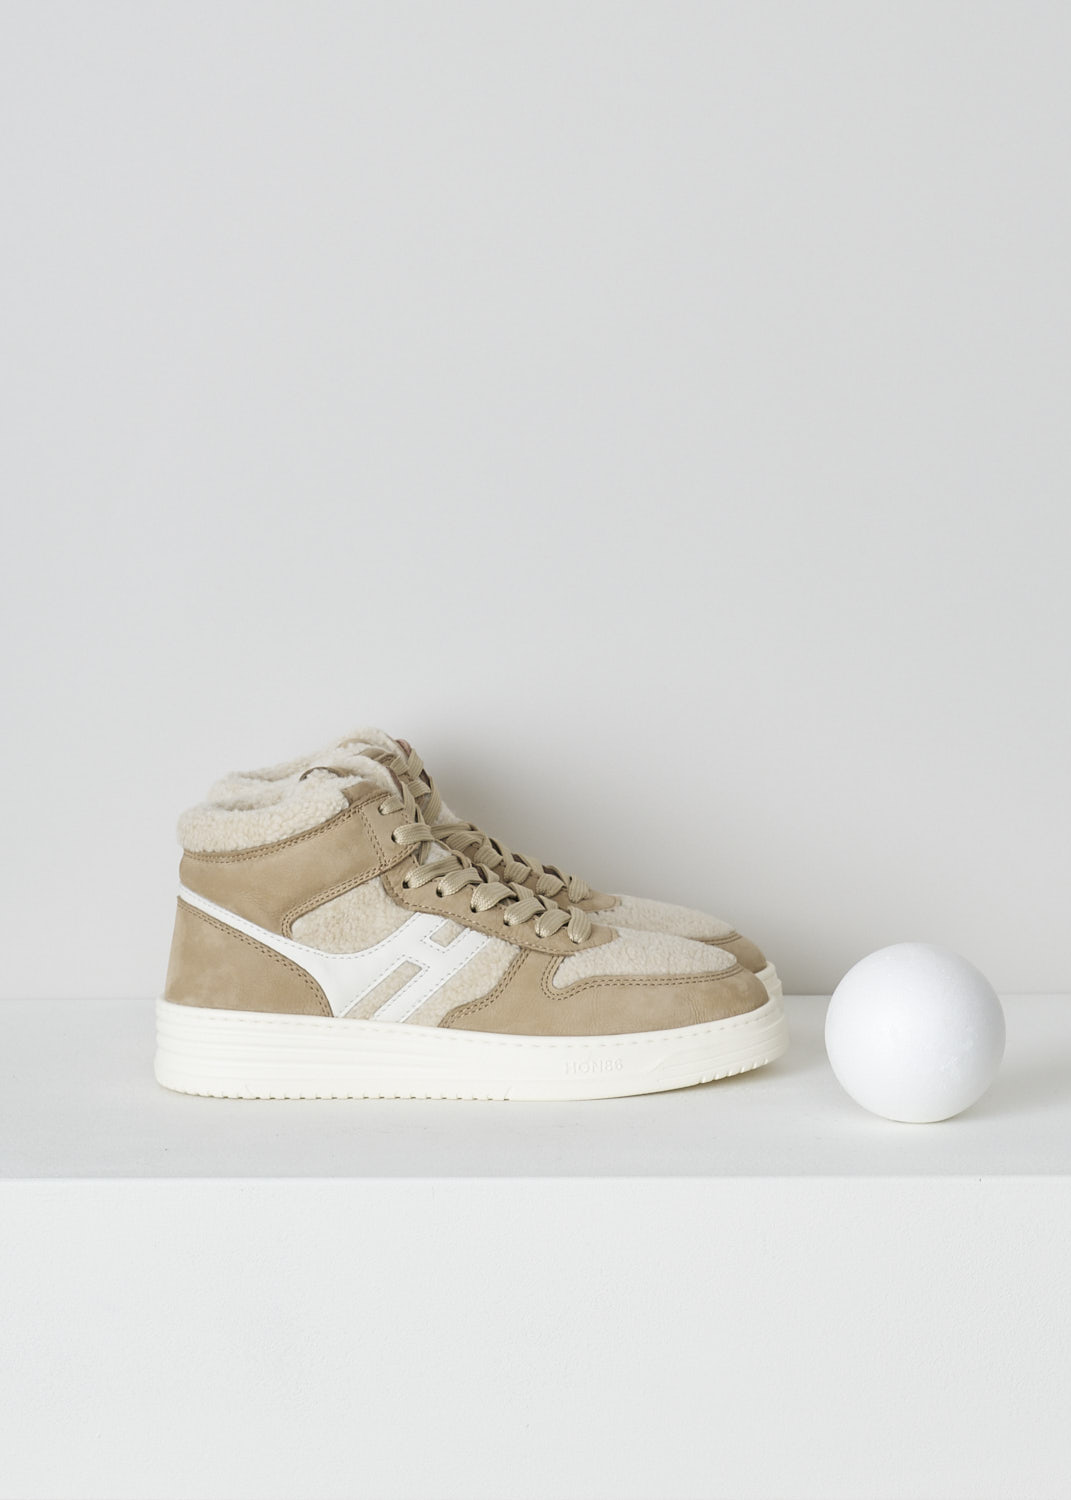 HOGAN, BEIGE TEDDY H630 BASKET SNEAKERS, GYW6300FE30SQW02S1_SQW, Beige, Side, These beige H630 Basket sneakers feature a front lace-up fastening with beige laces. On the tongue, a  brown leather tab has the brand's logo embossed on it. The sneaker consist of brown suede and white teddy fabric. On the side, the brand's H logo has been incorporated in the design in white leather.  These sneakers have a thick white sole. They come with an additional pair of laces in brown.   
